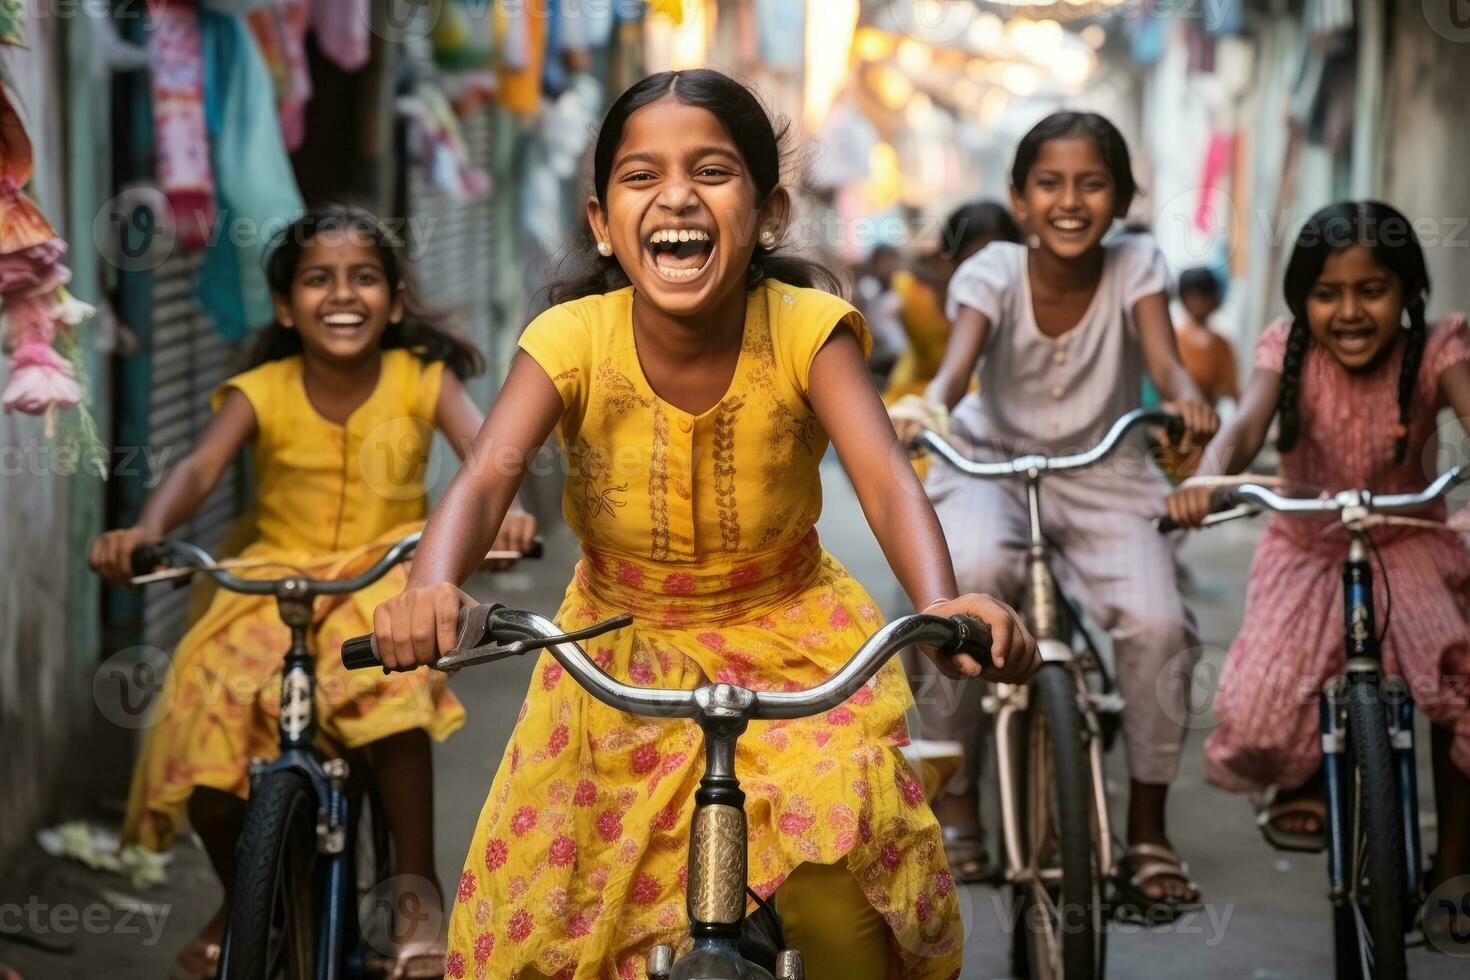 Unbridled Happiness - Lifestyle Image of Children on Bicycles with Beaming Smiles - AI generated photo